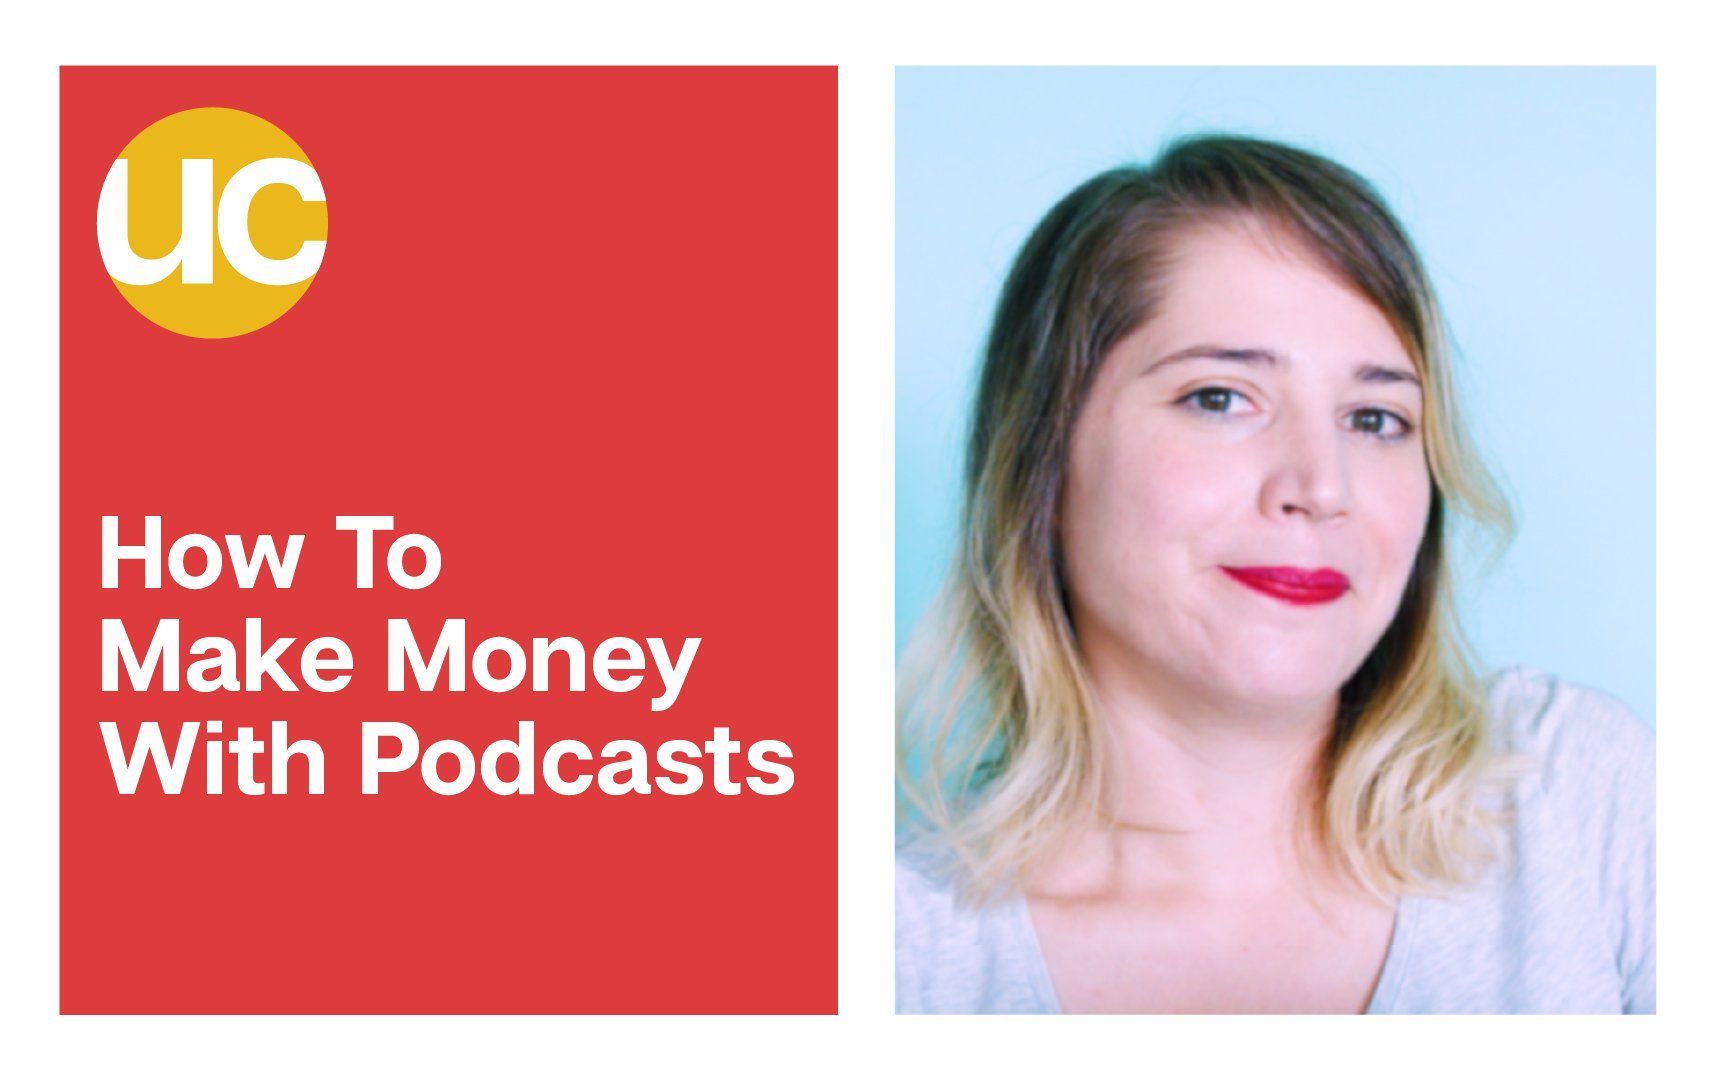 How To Make Money With Podcasts